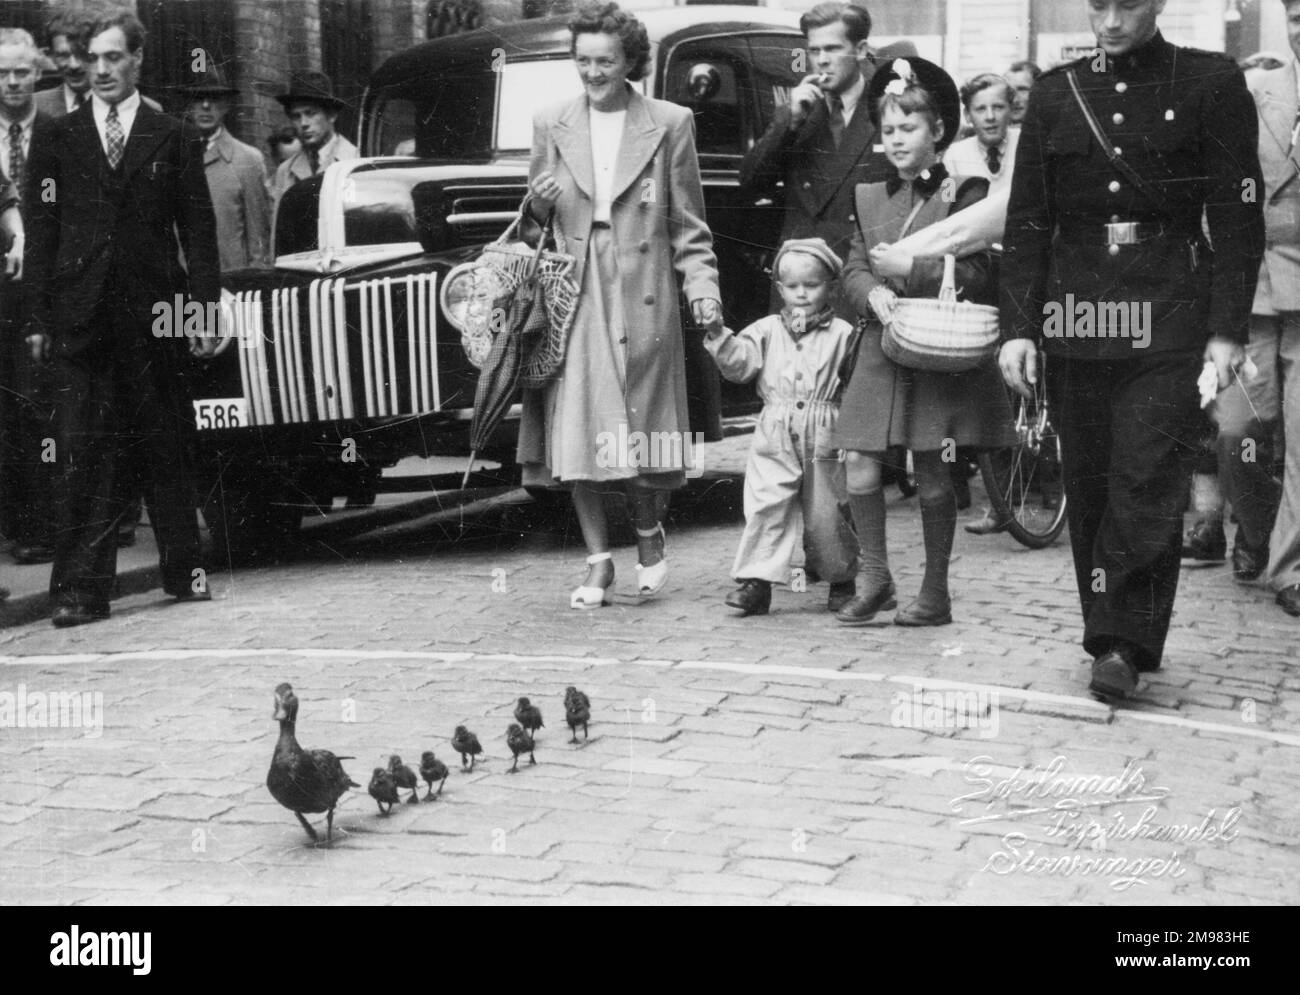 A Mummy duck and her family of baby ducklings receive a Police Escort as they stride confidently along the streets of Stavanger, Norway, gathering quite a crowd! Stock Photo